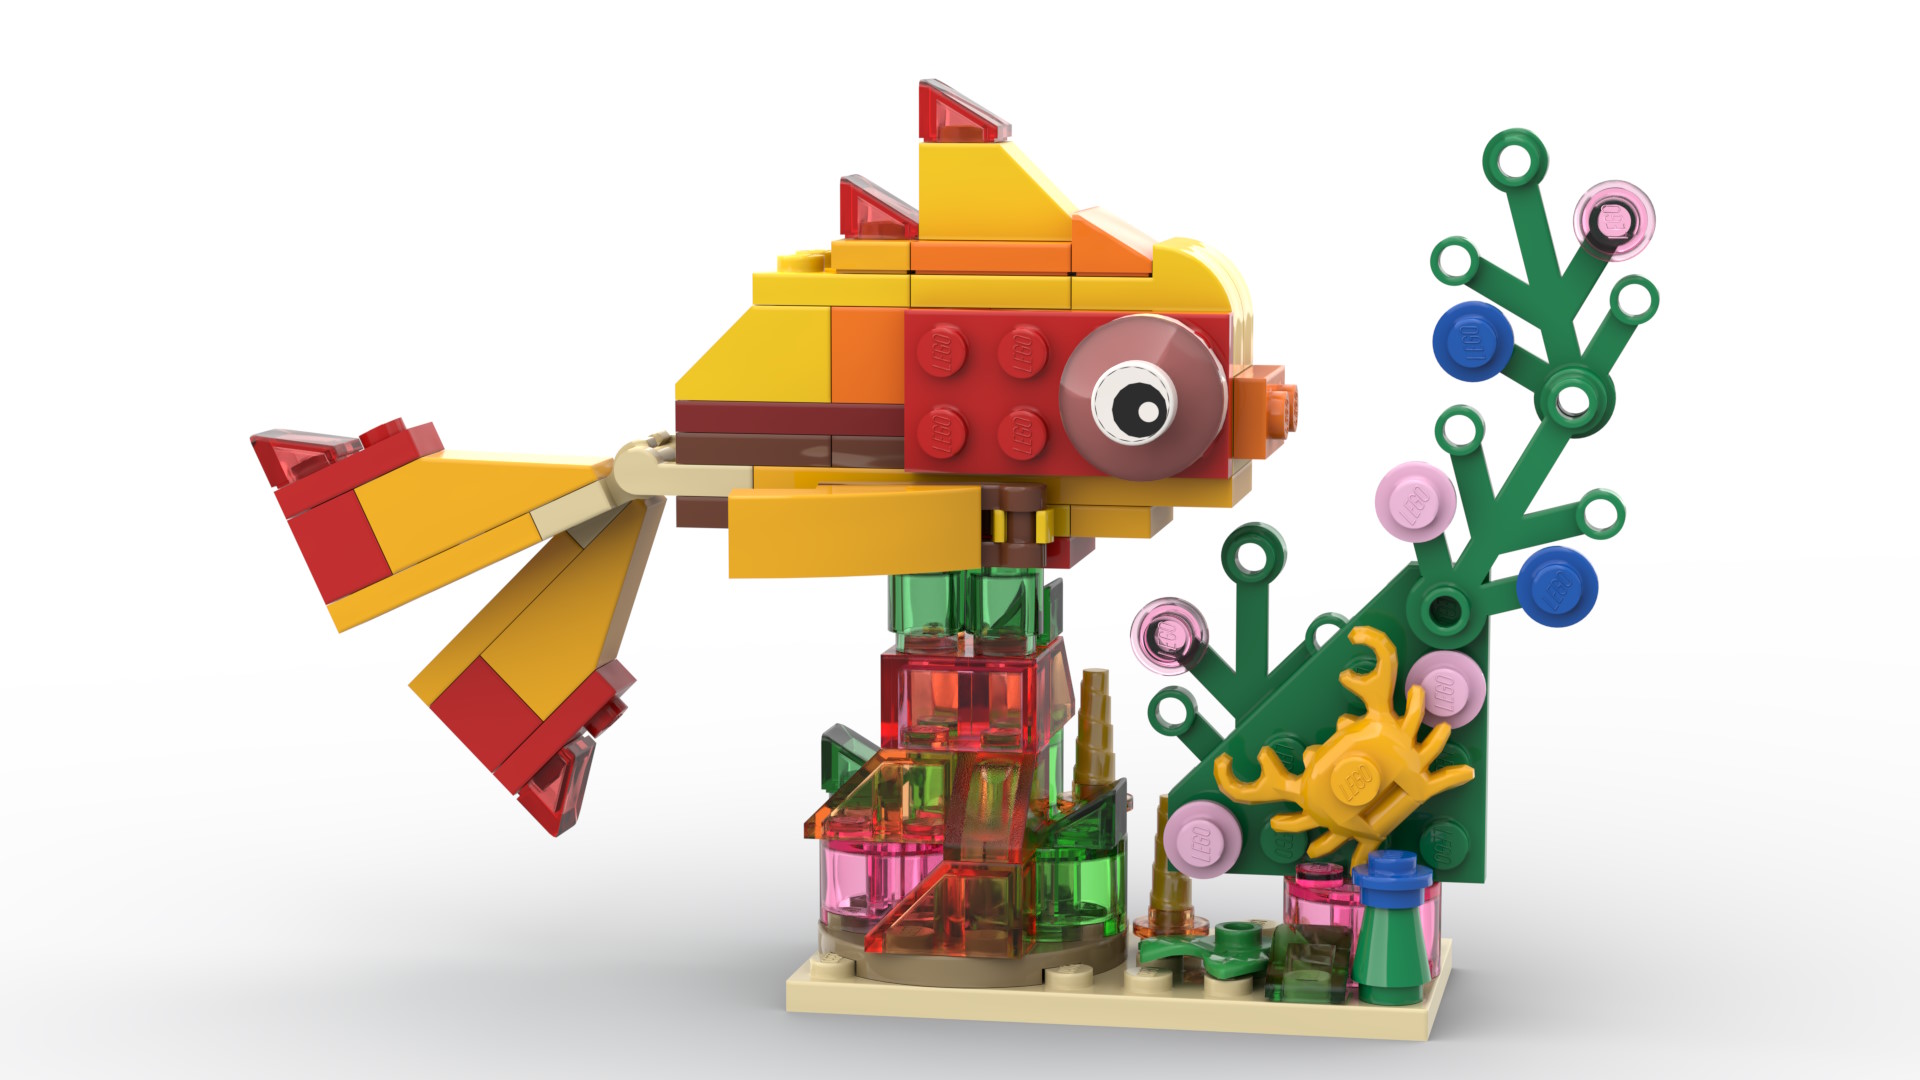 Lenarex breathes new life into Lego with creative alt builds